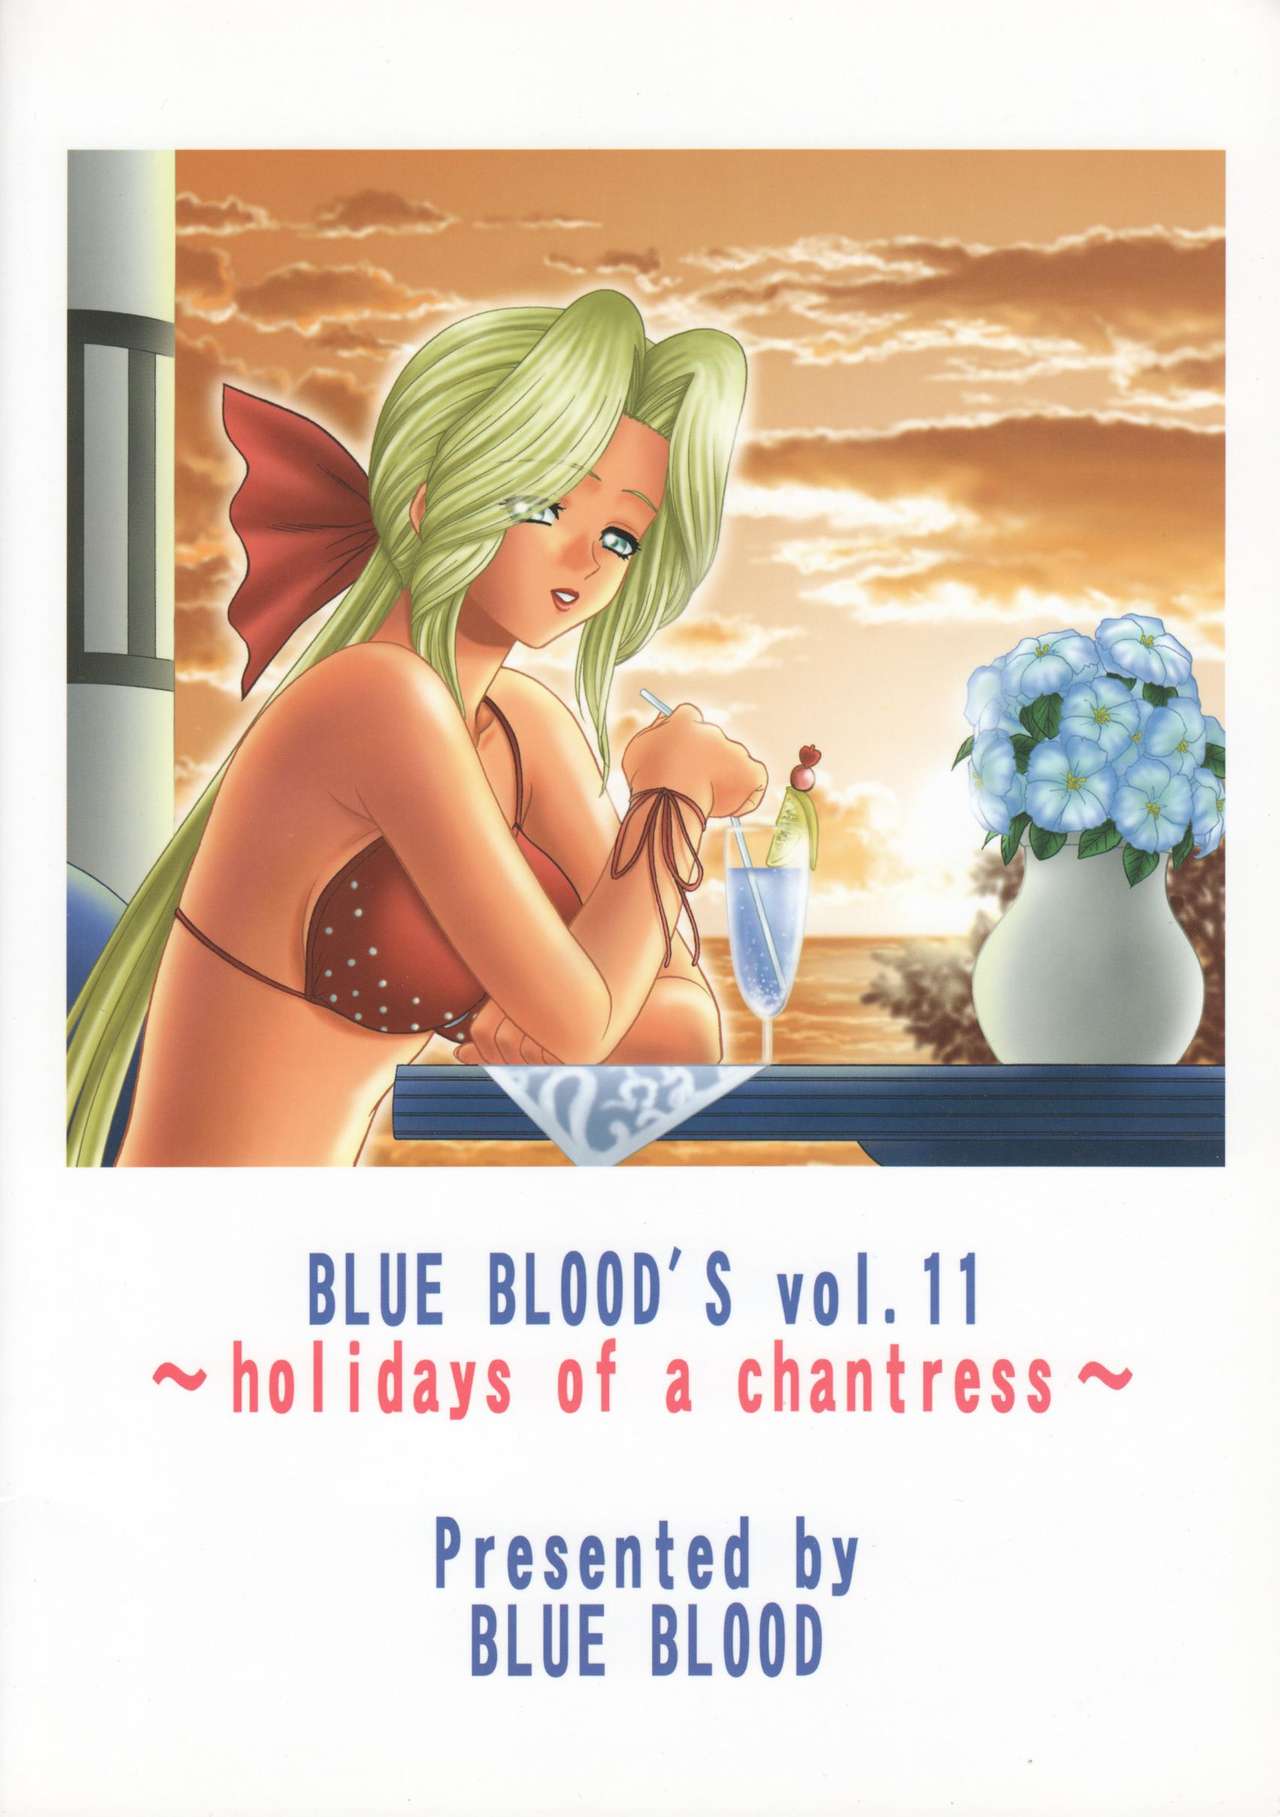 (CR33) [BLUE BLOOD'S (BLUE BLOOD)] BLUE BLOOD'S Vol. 11 (Dead or Alive Xtreme Beach Volleyball) (Cレヴォ33) [BLUE BLOOD'S (BLUE BLOOD)] BLUE BLOOD'S vol.11 (デッド・オア・アライブ エクストリーム・ビーチバレーボール)